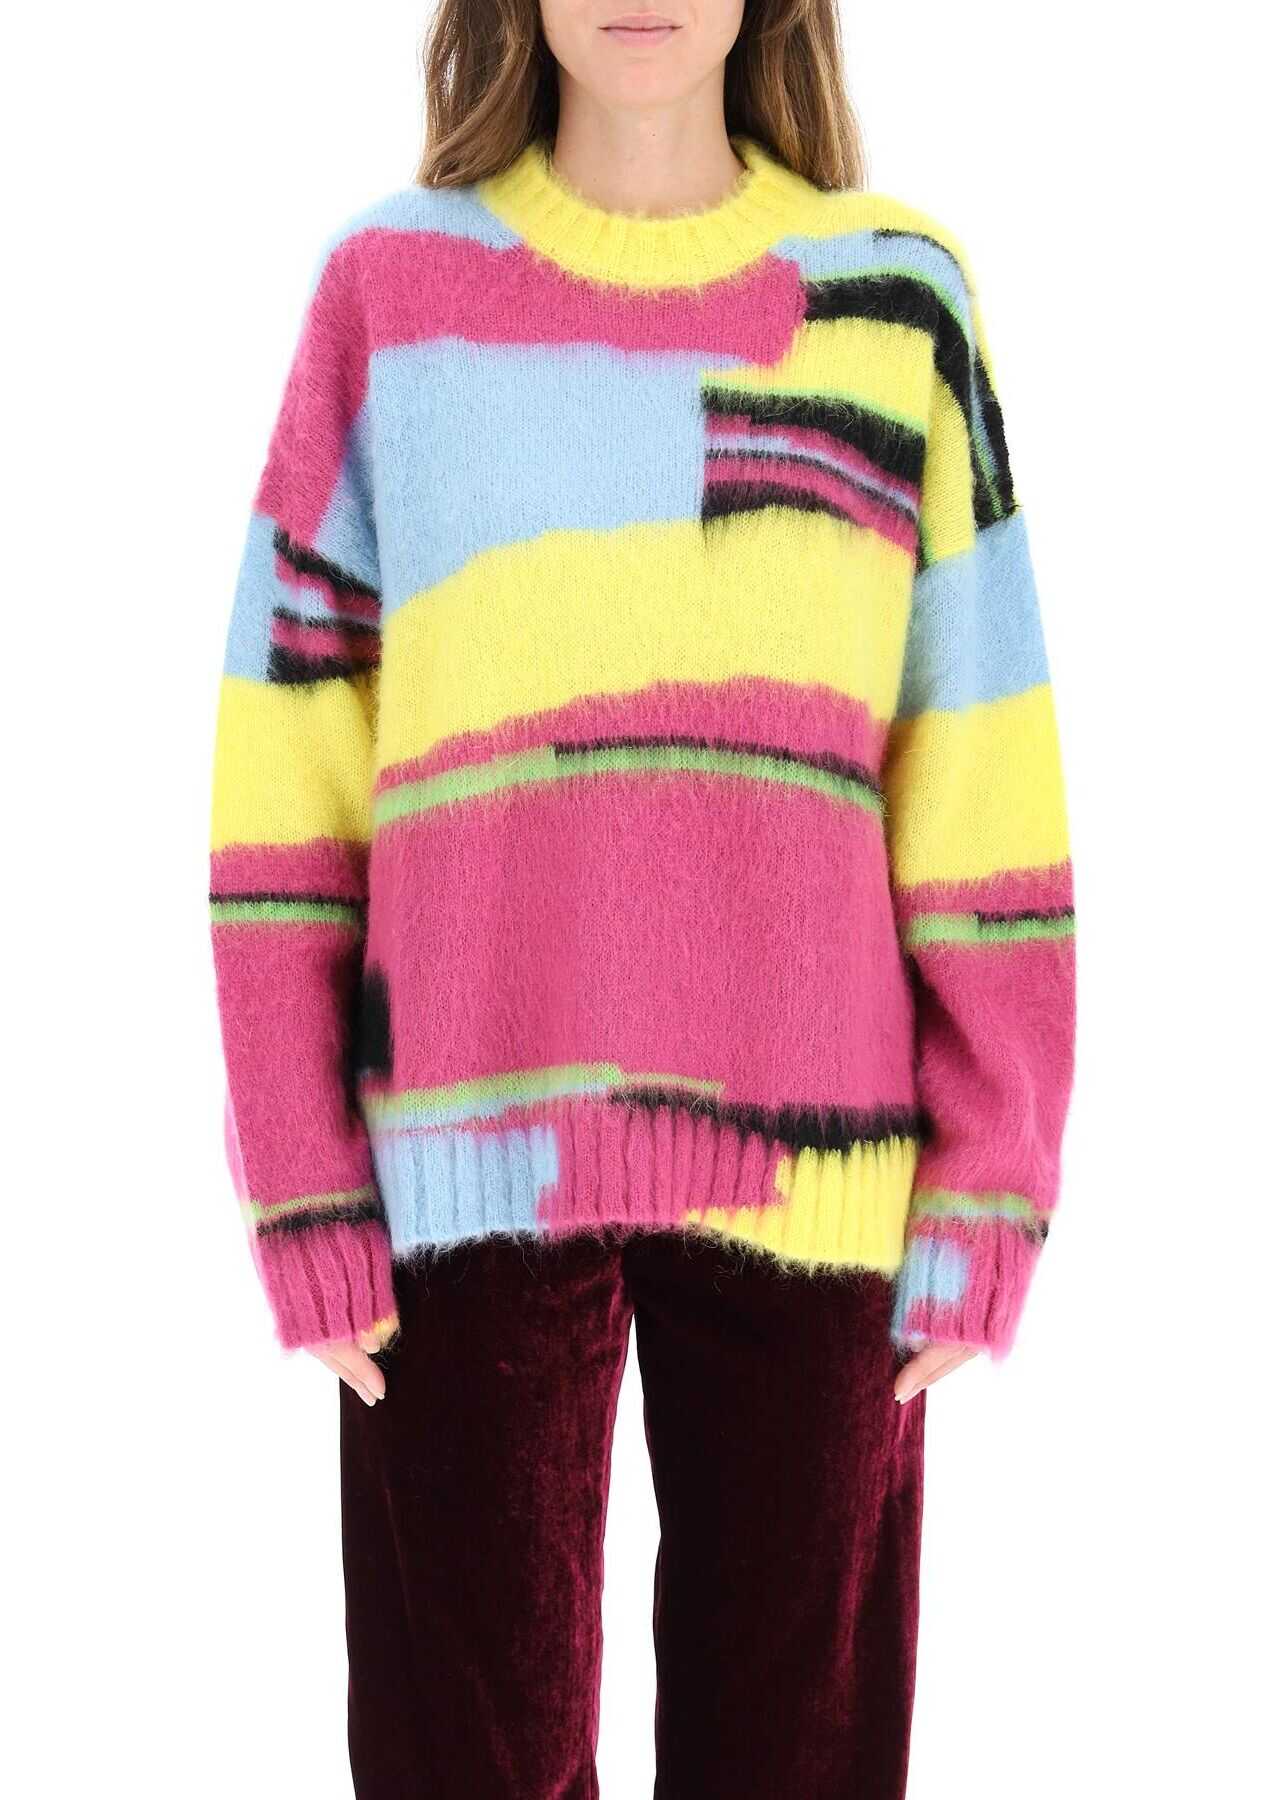 MSGM \'The Long Thing\' Sweater By Alessandro Calabrese 3142MDM227 217975 PINK MULTICOLOR